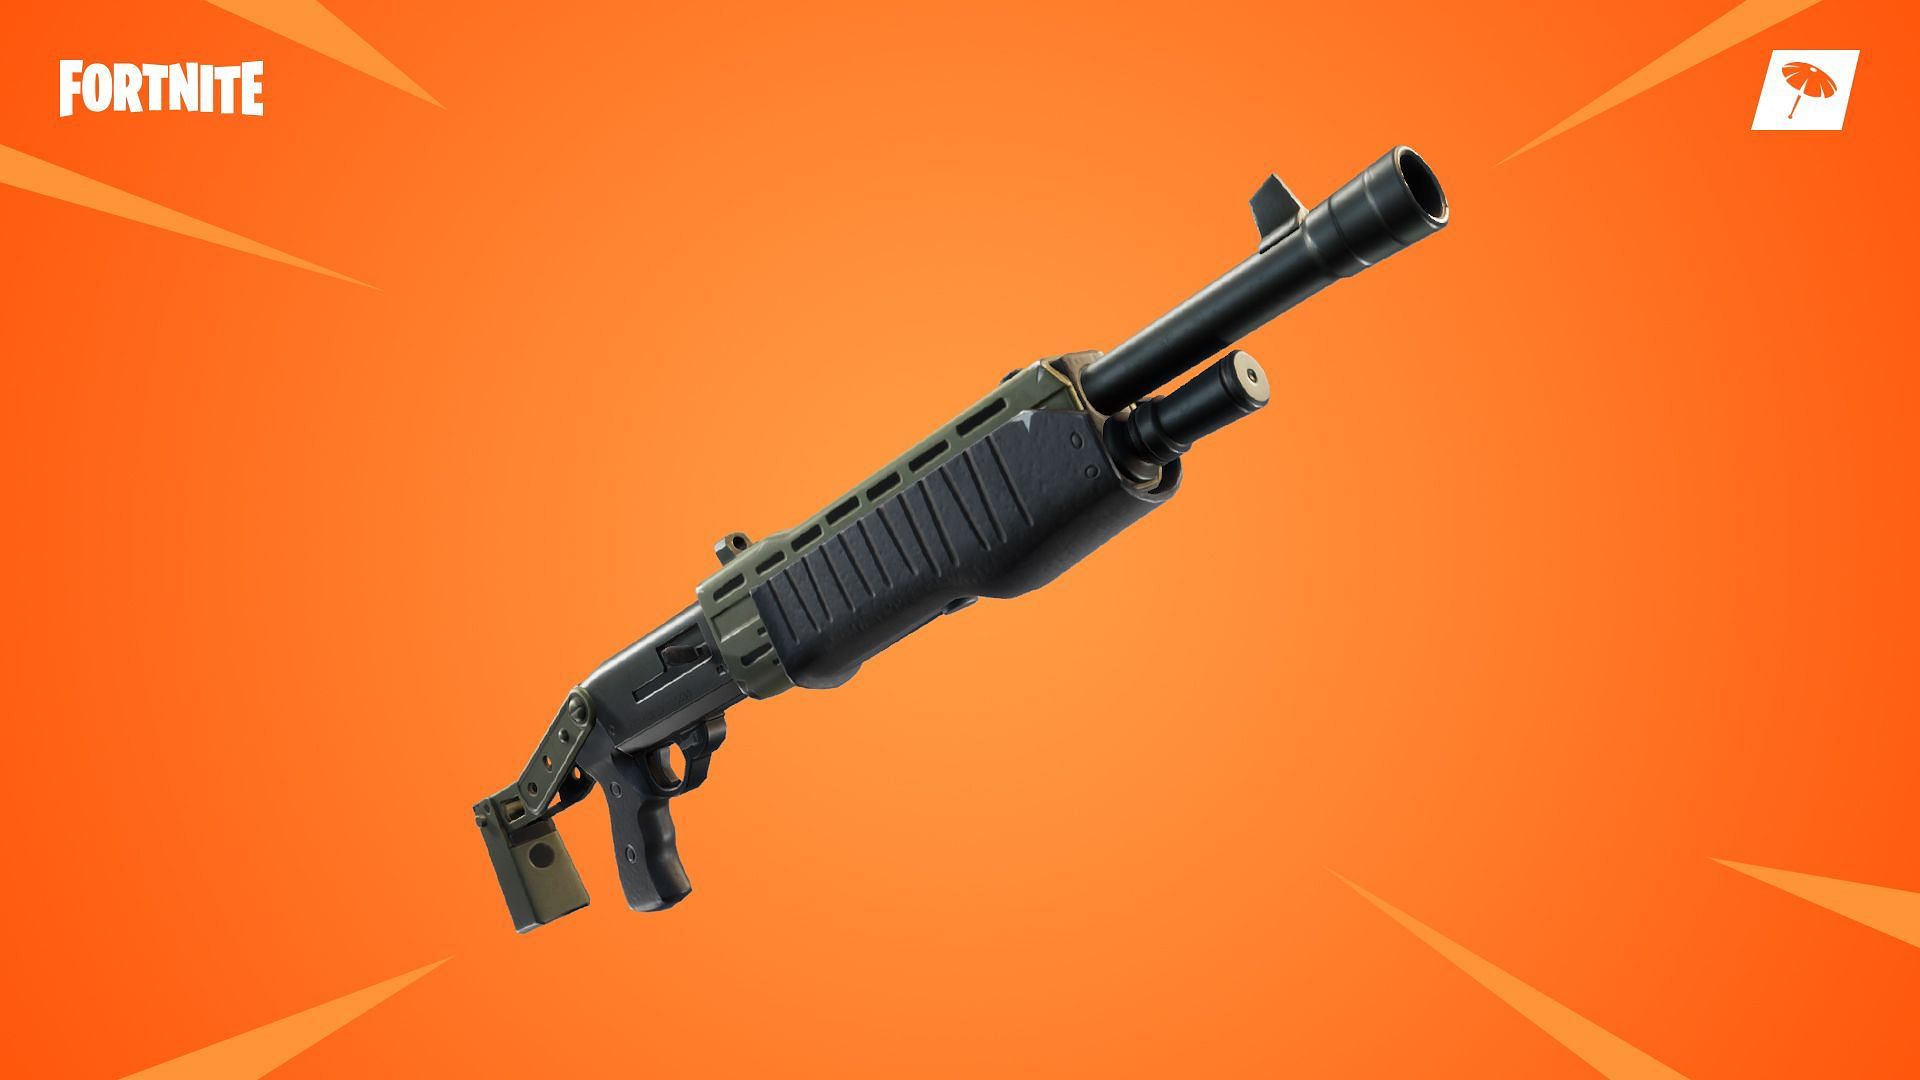 Fortnite Chapter 3 Season 2 will bring back the fan-favorite Pump Shotgun from Chapter 1, but it in a new avatar (Image via Epic Games)